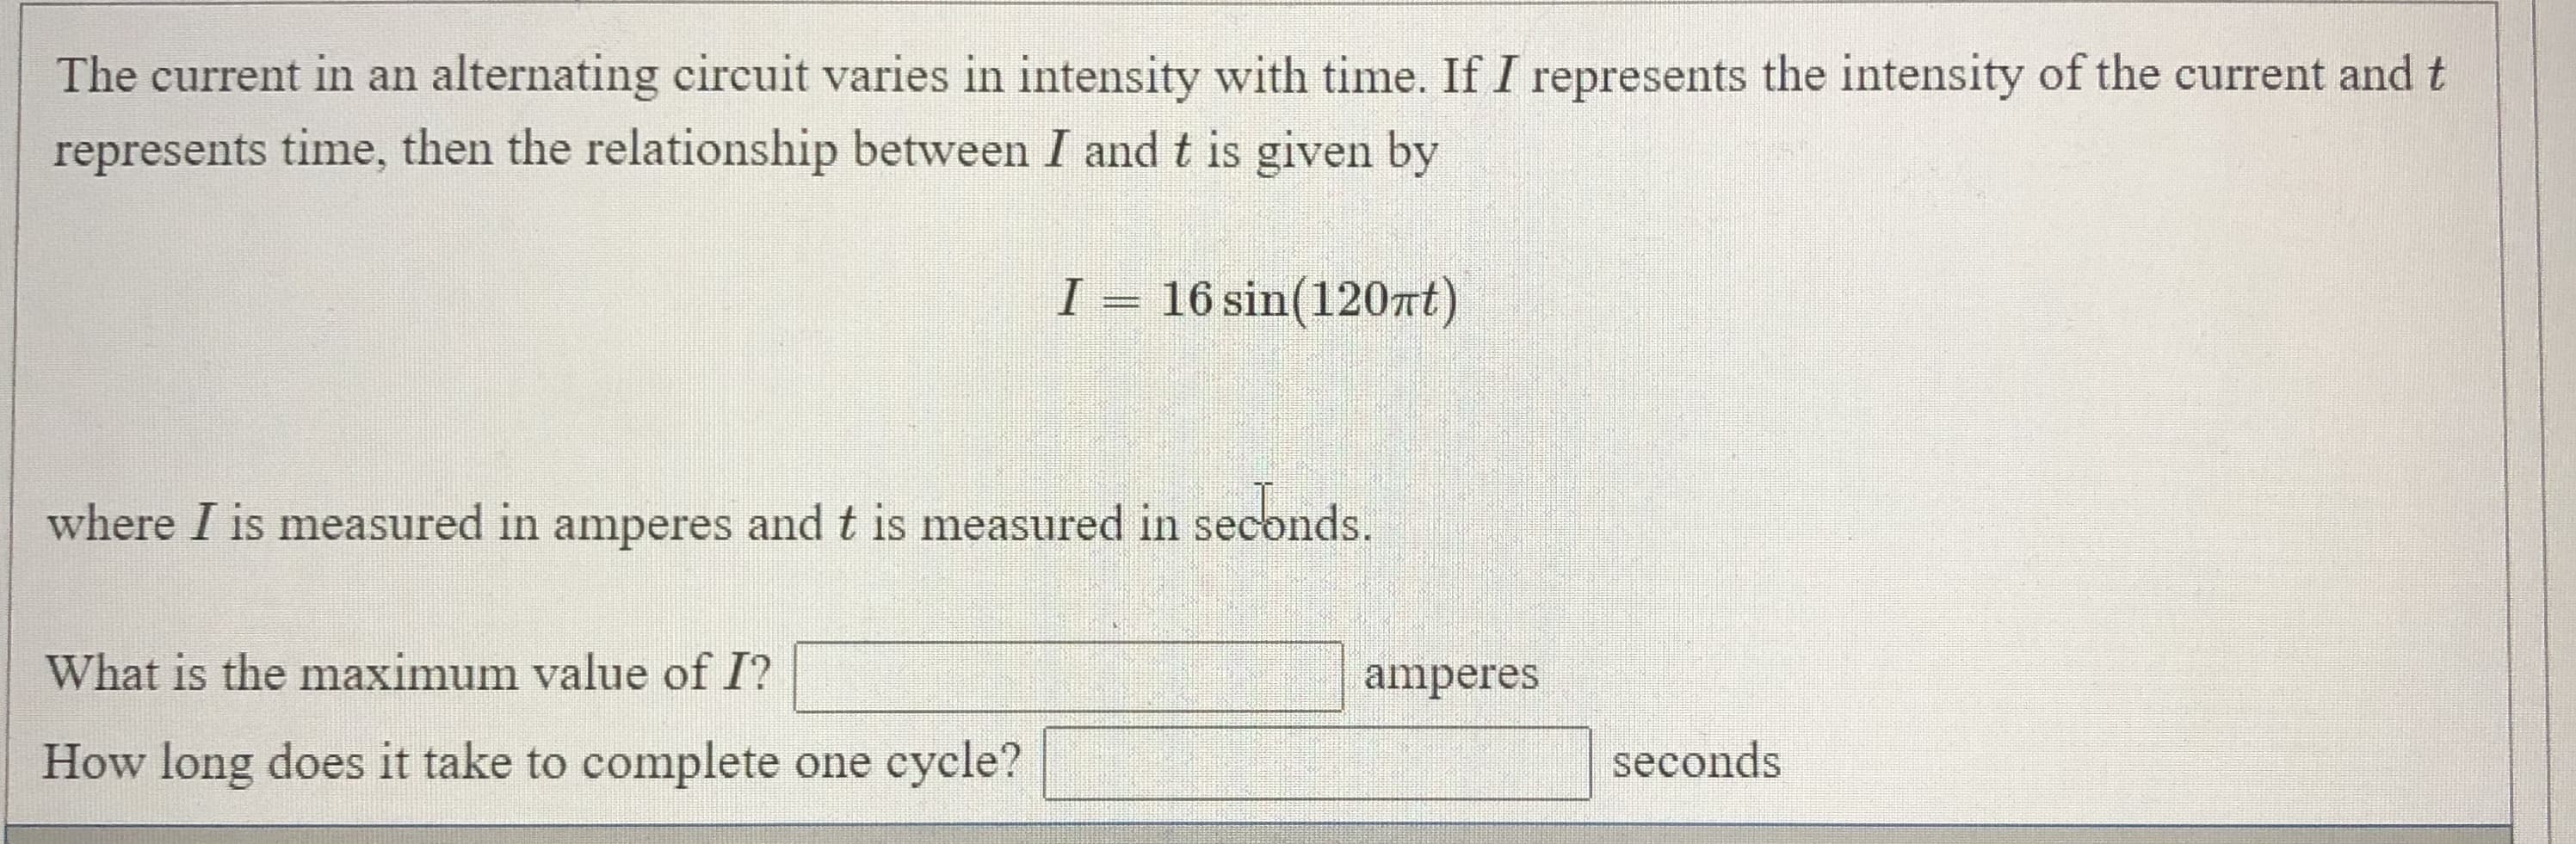 The current in an alternating circuit varies in intensity with time. If I represents the intensity of the current and t
represents time, then the relationship between I and t is given by
I
16 sin(120at)
where I is measured in amperes and t is measured in seconds.
What is the maximum value of I?
amperes
How long does it take to complete one cycle?
seconds
